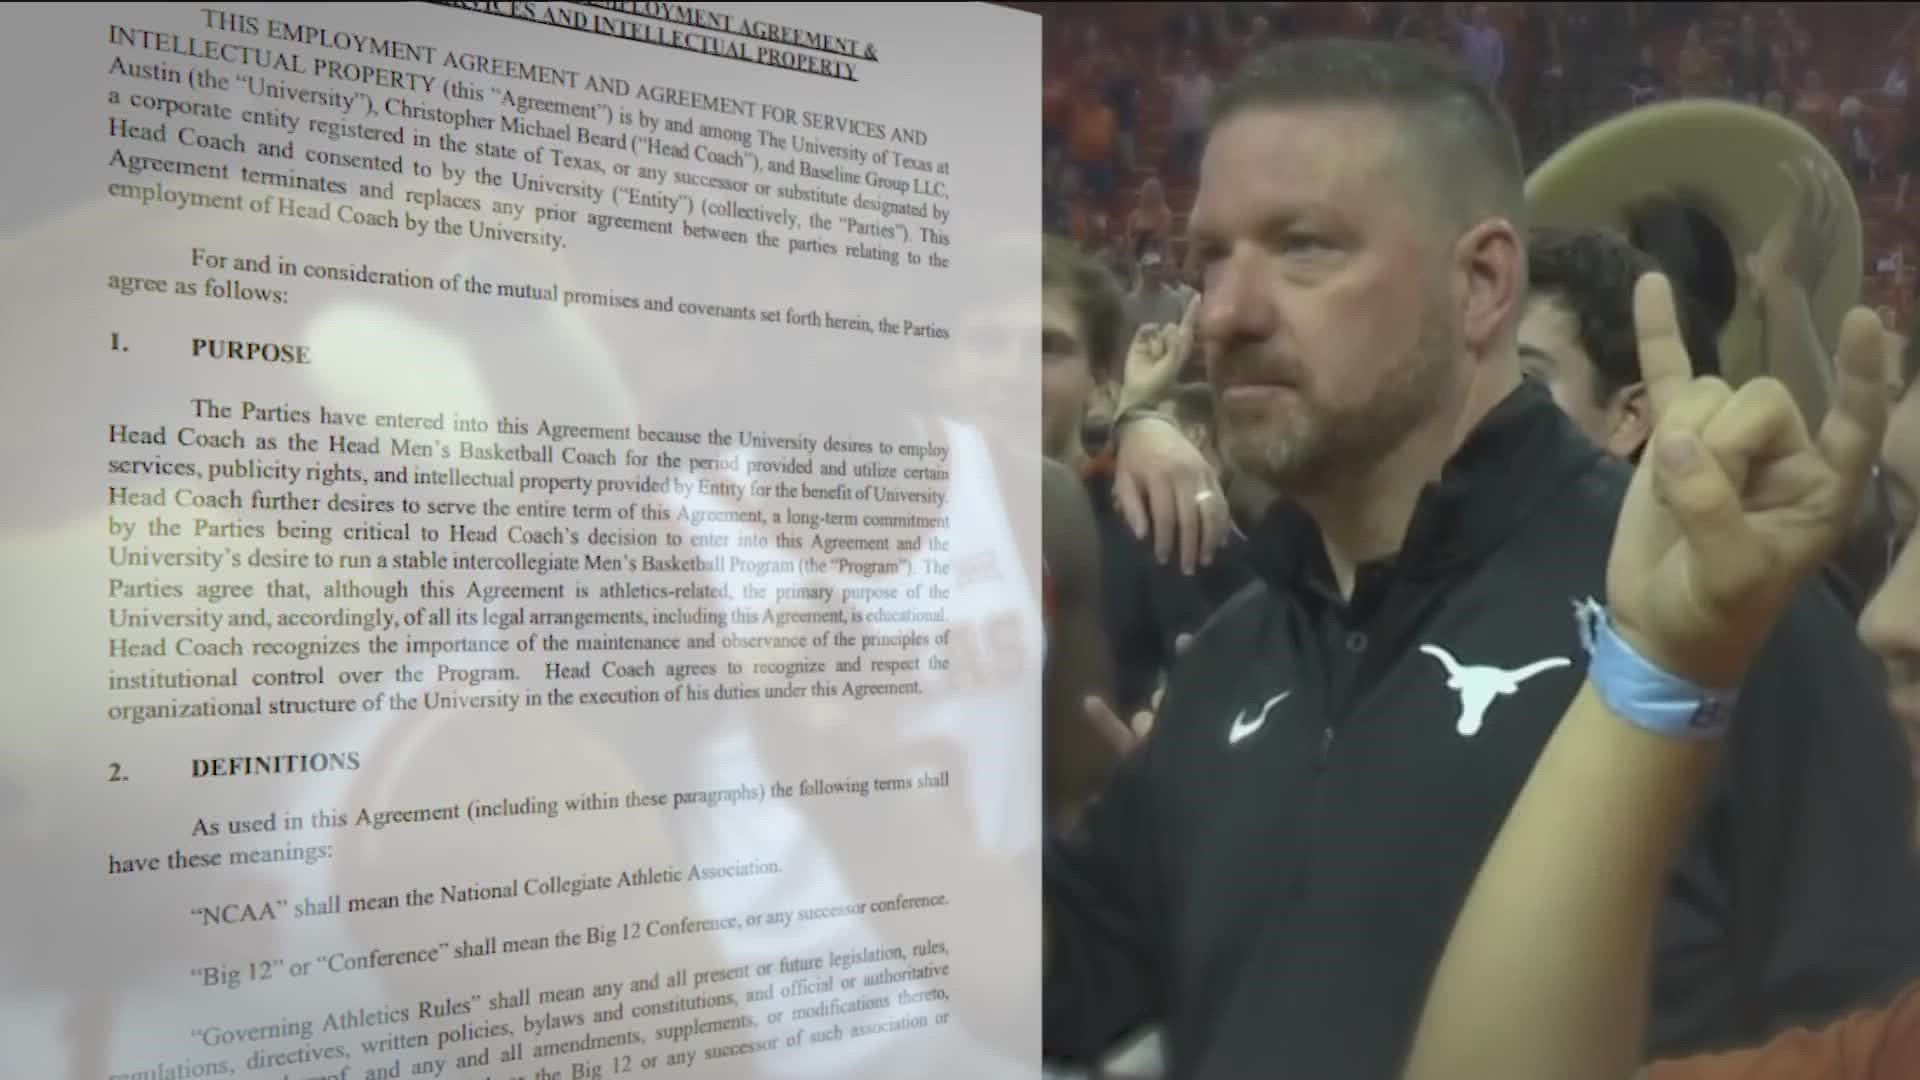 Chris Beard's contract details what offenses could lead to his suspension and/or termination.